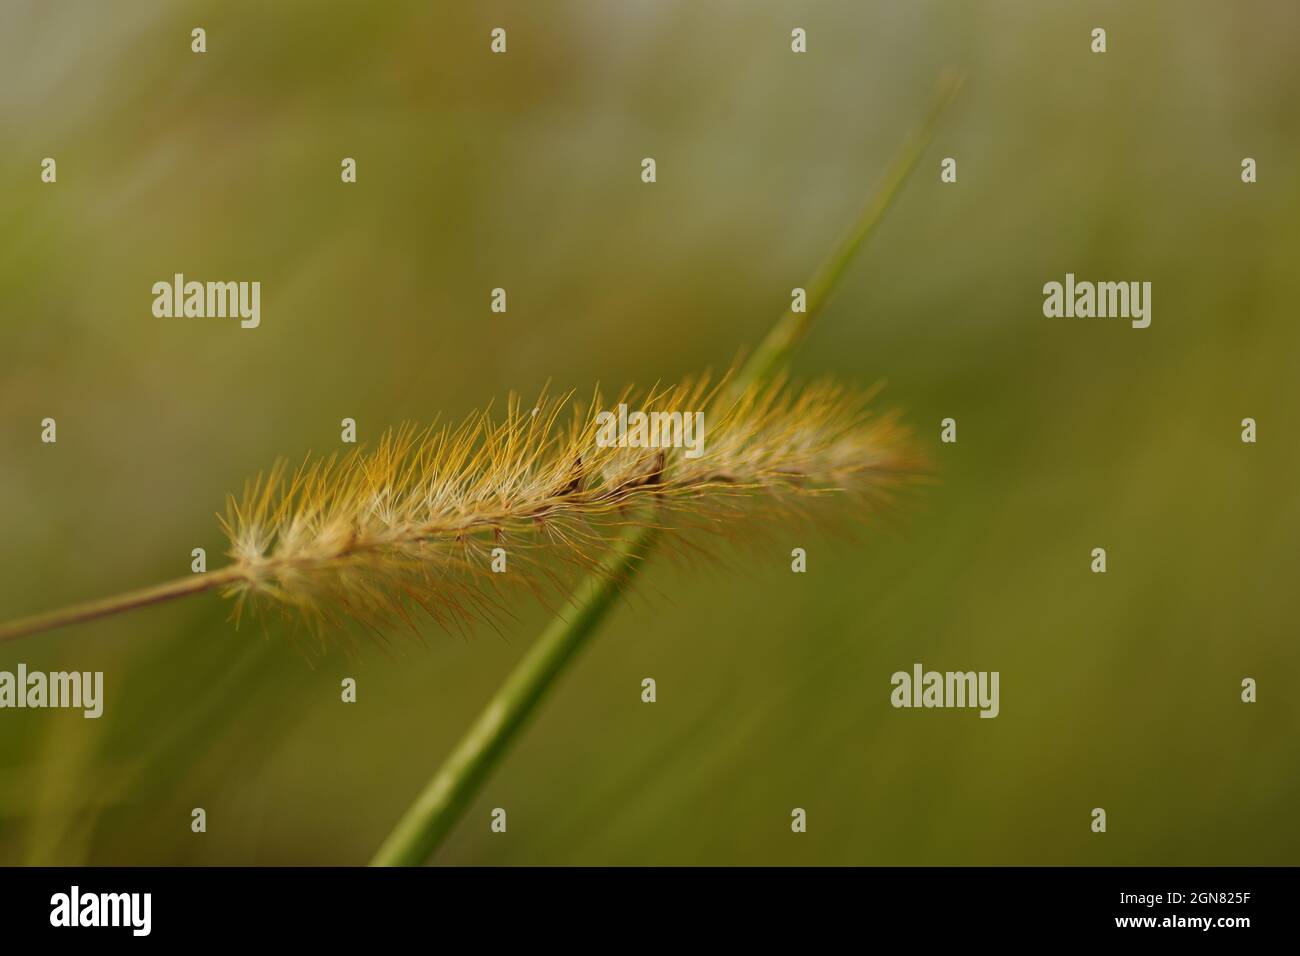 A Setaria pumila ( fox millet ) in front of a standing blade of grass Stock Photo